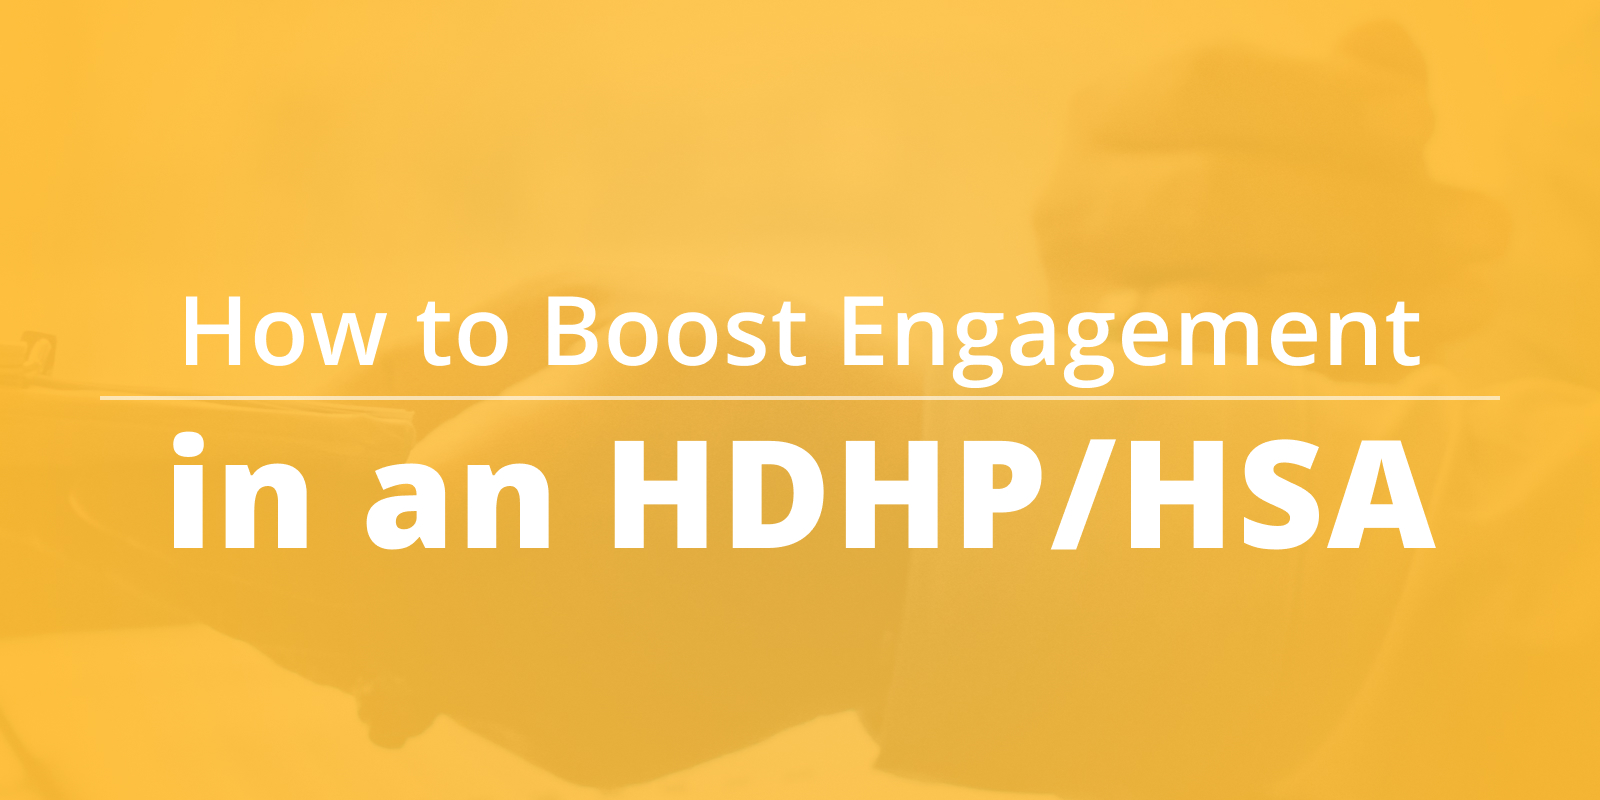 How to Boost Engagement in Your HDHP/HSA